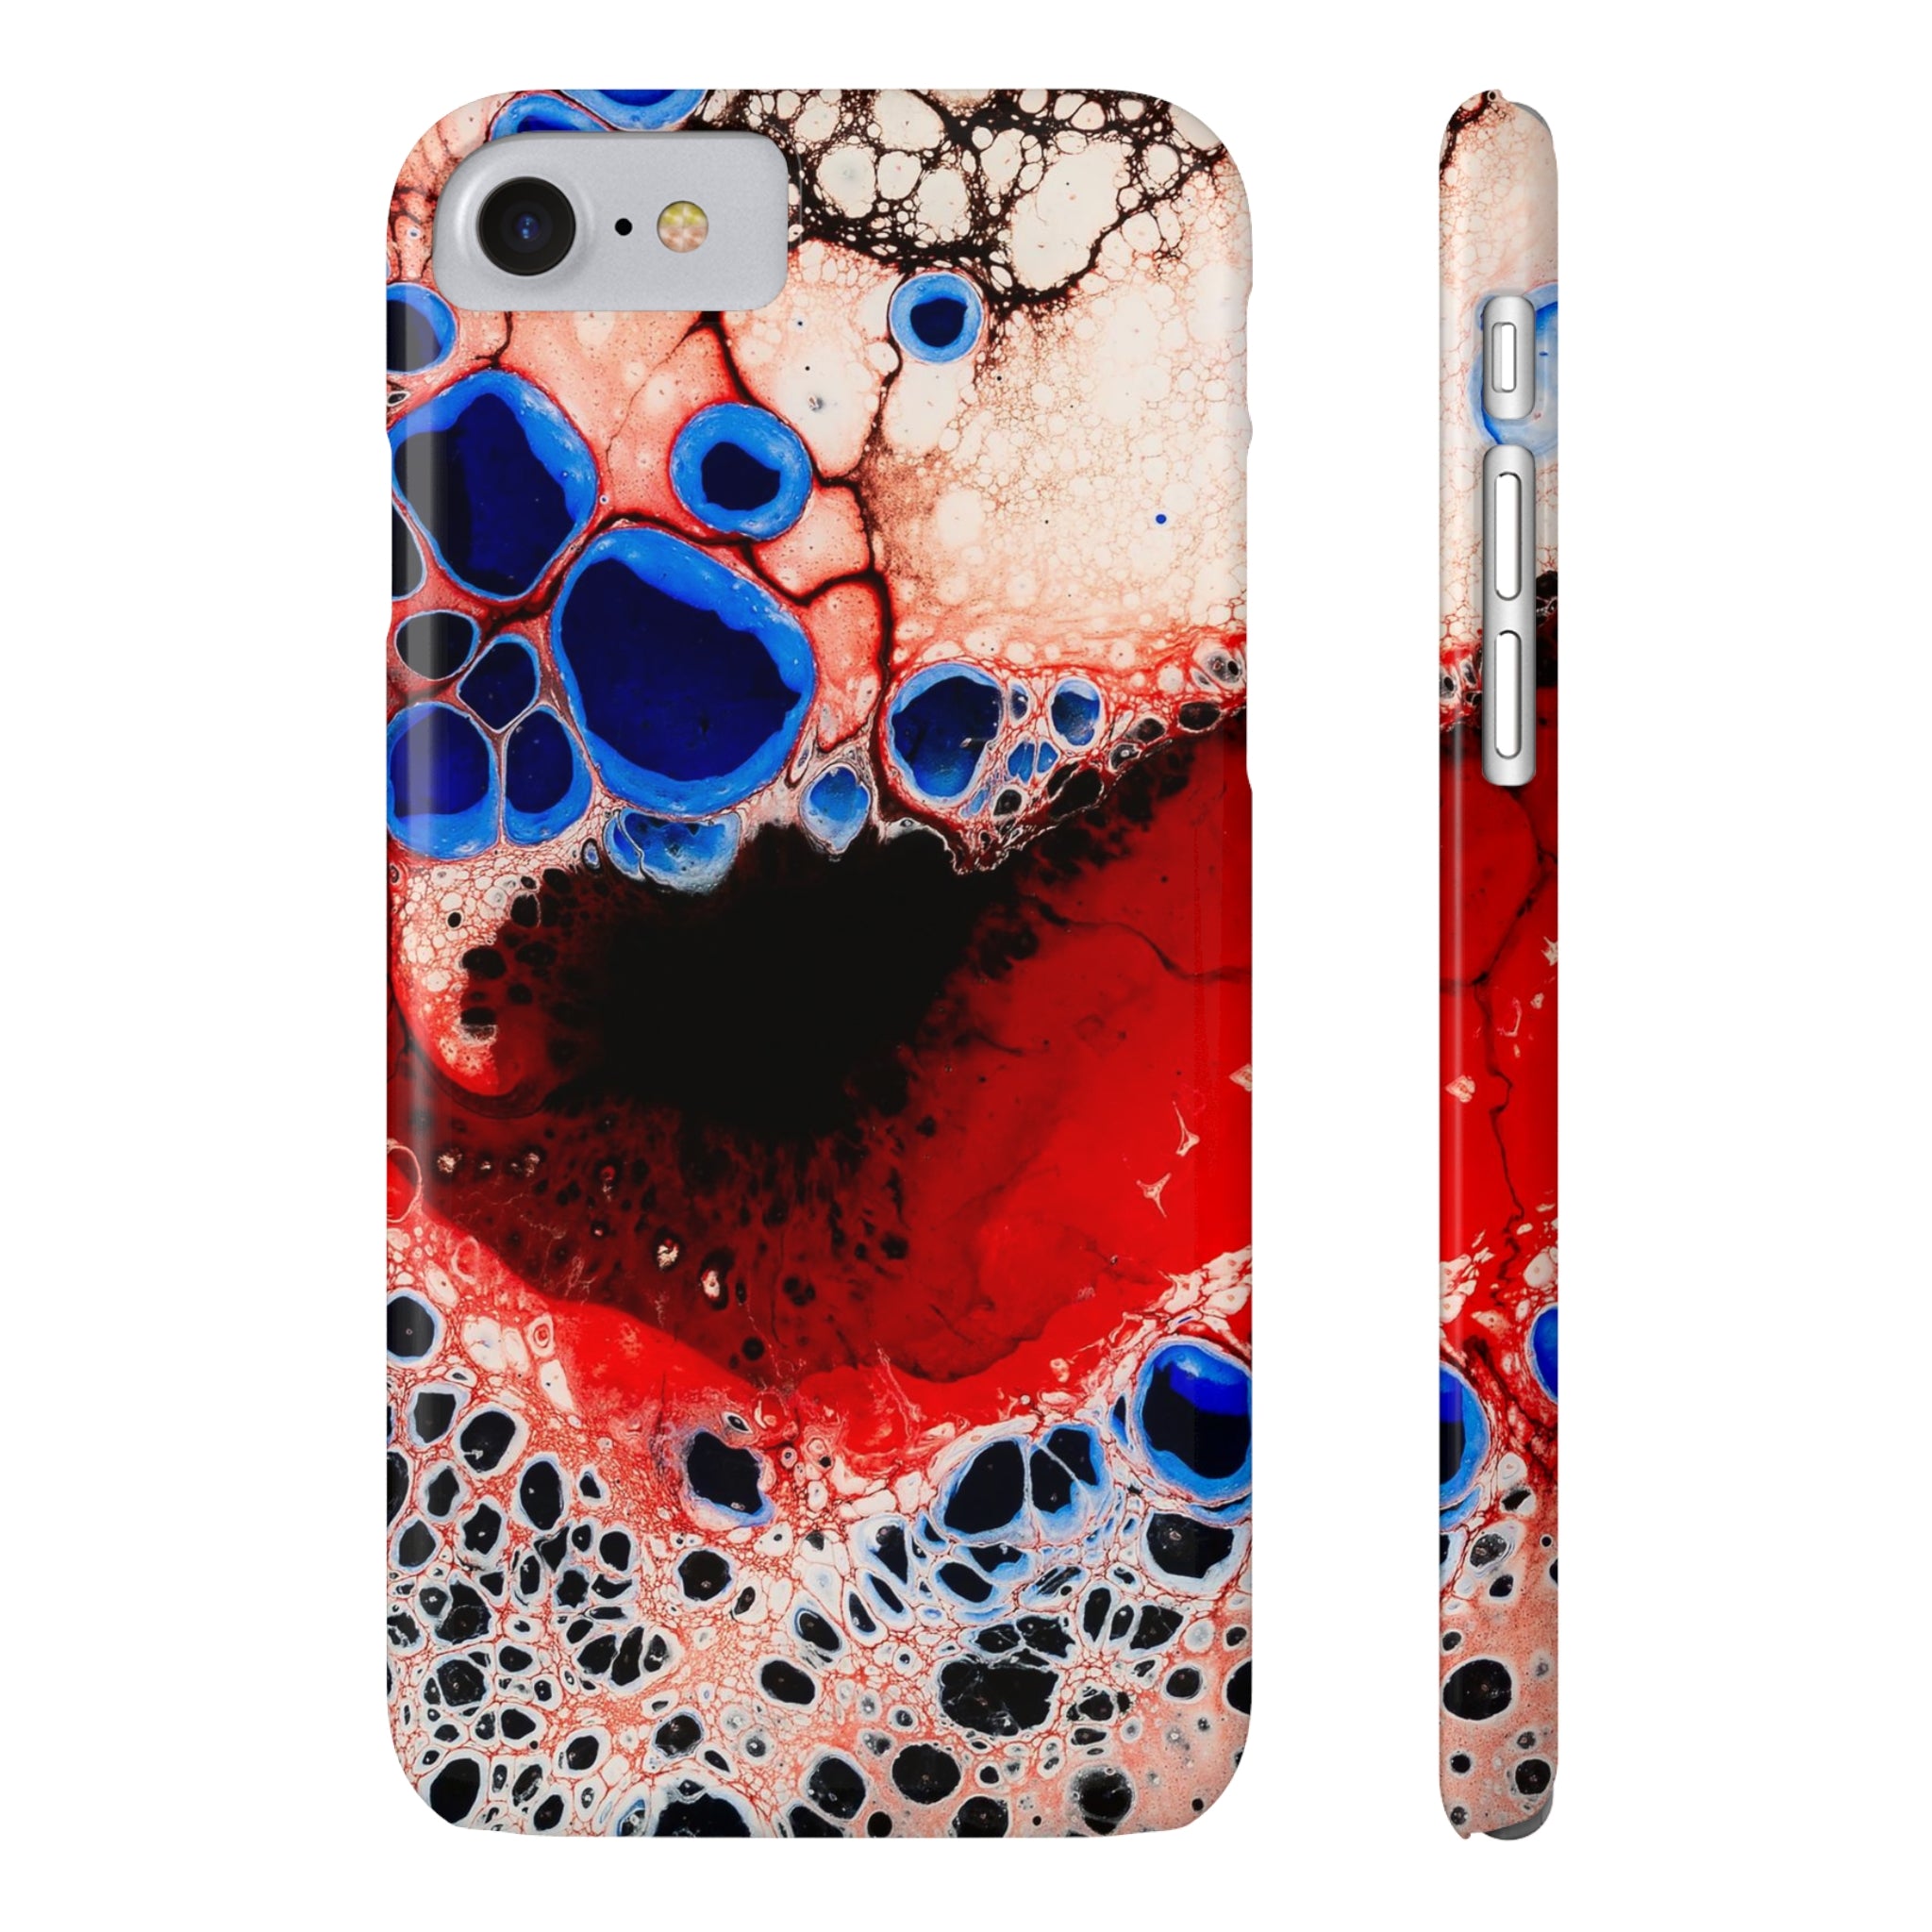 Abyss Of Emptiness - Slim Phone Cases